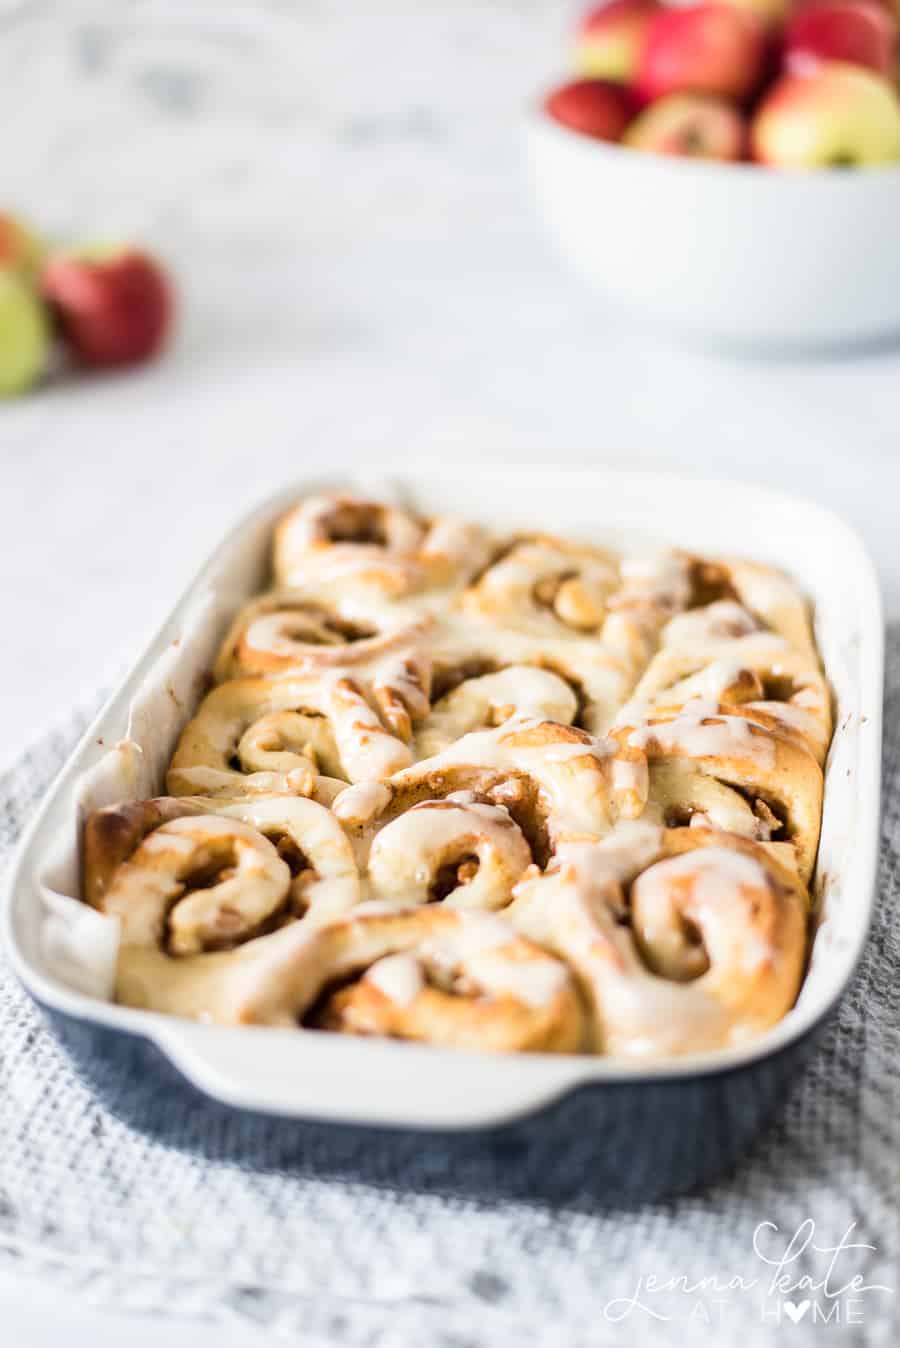 Cinnamon roll with apple pie filling. Say bye to Pillsbury and hello to homemade!